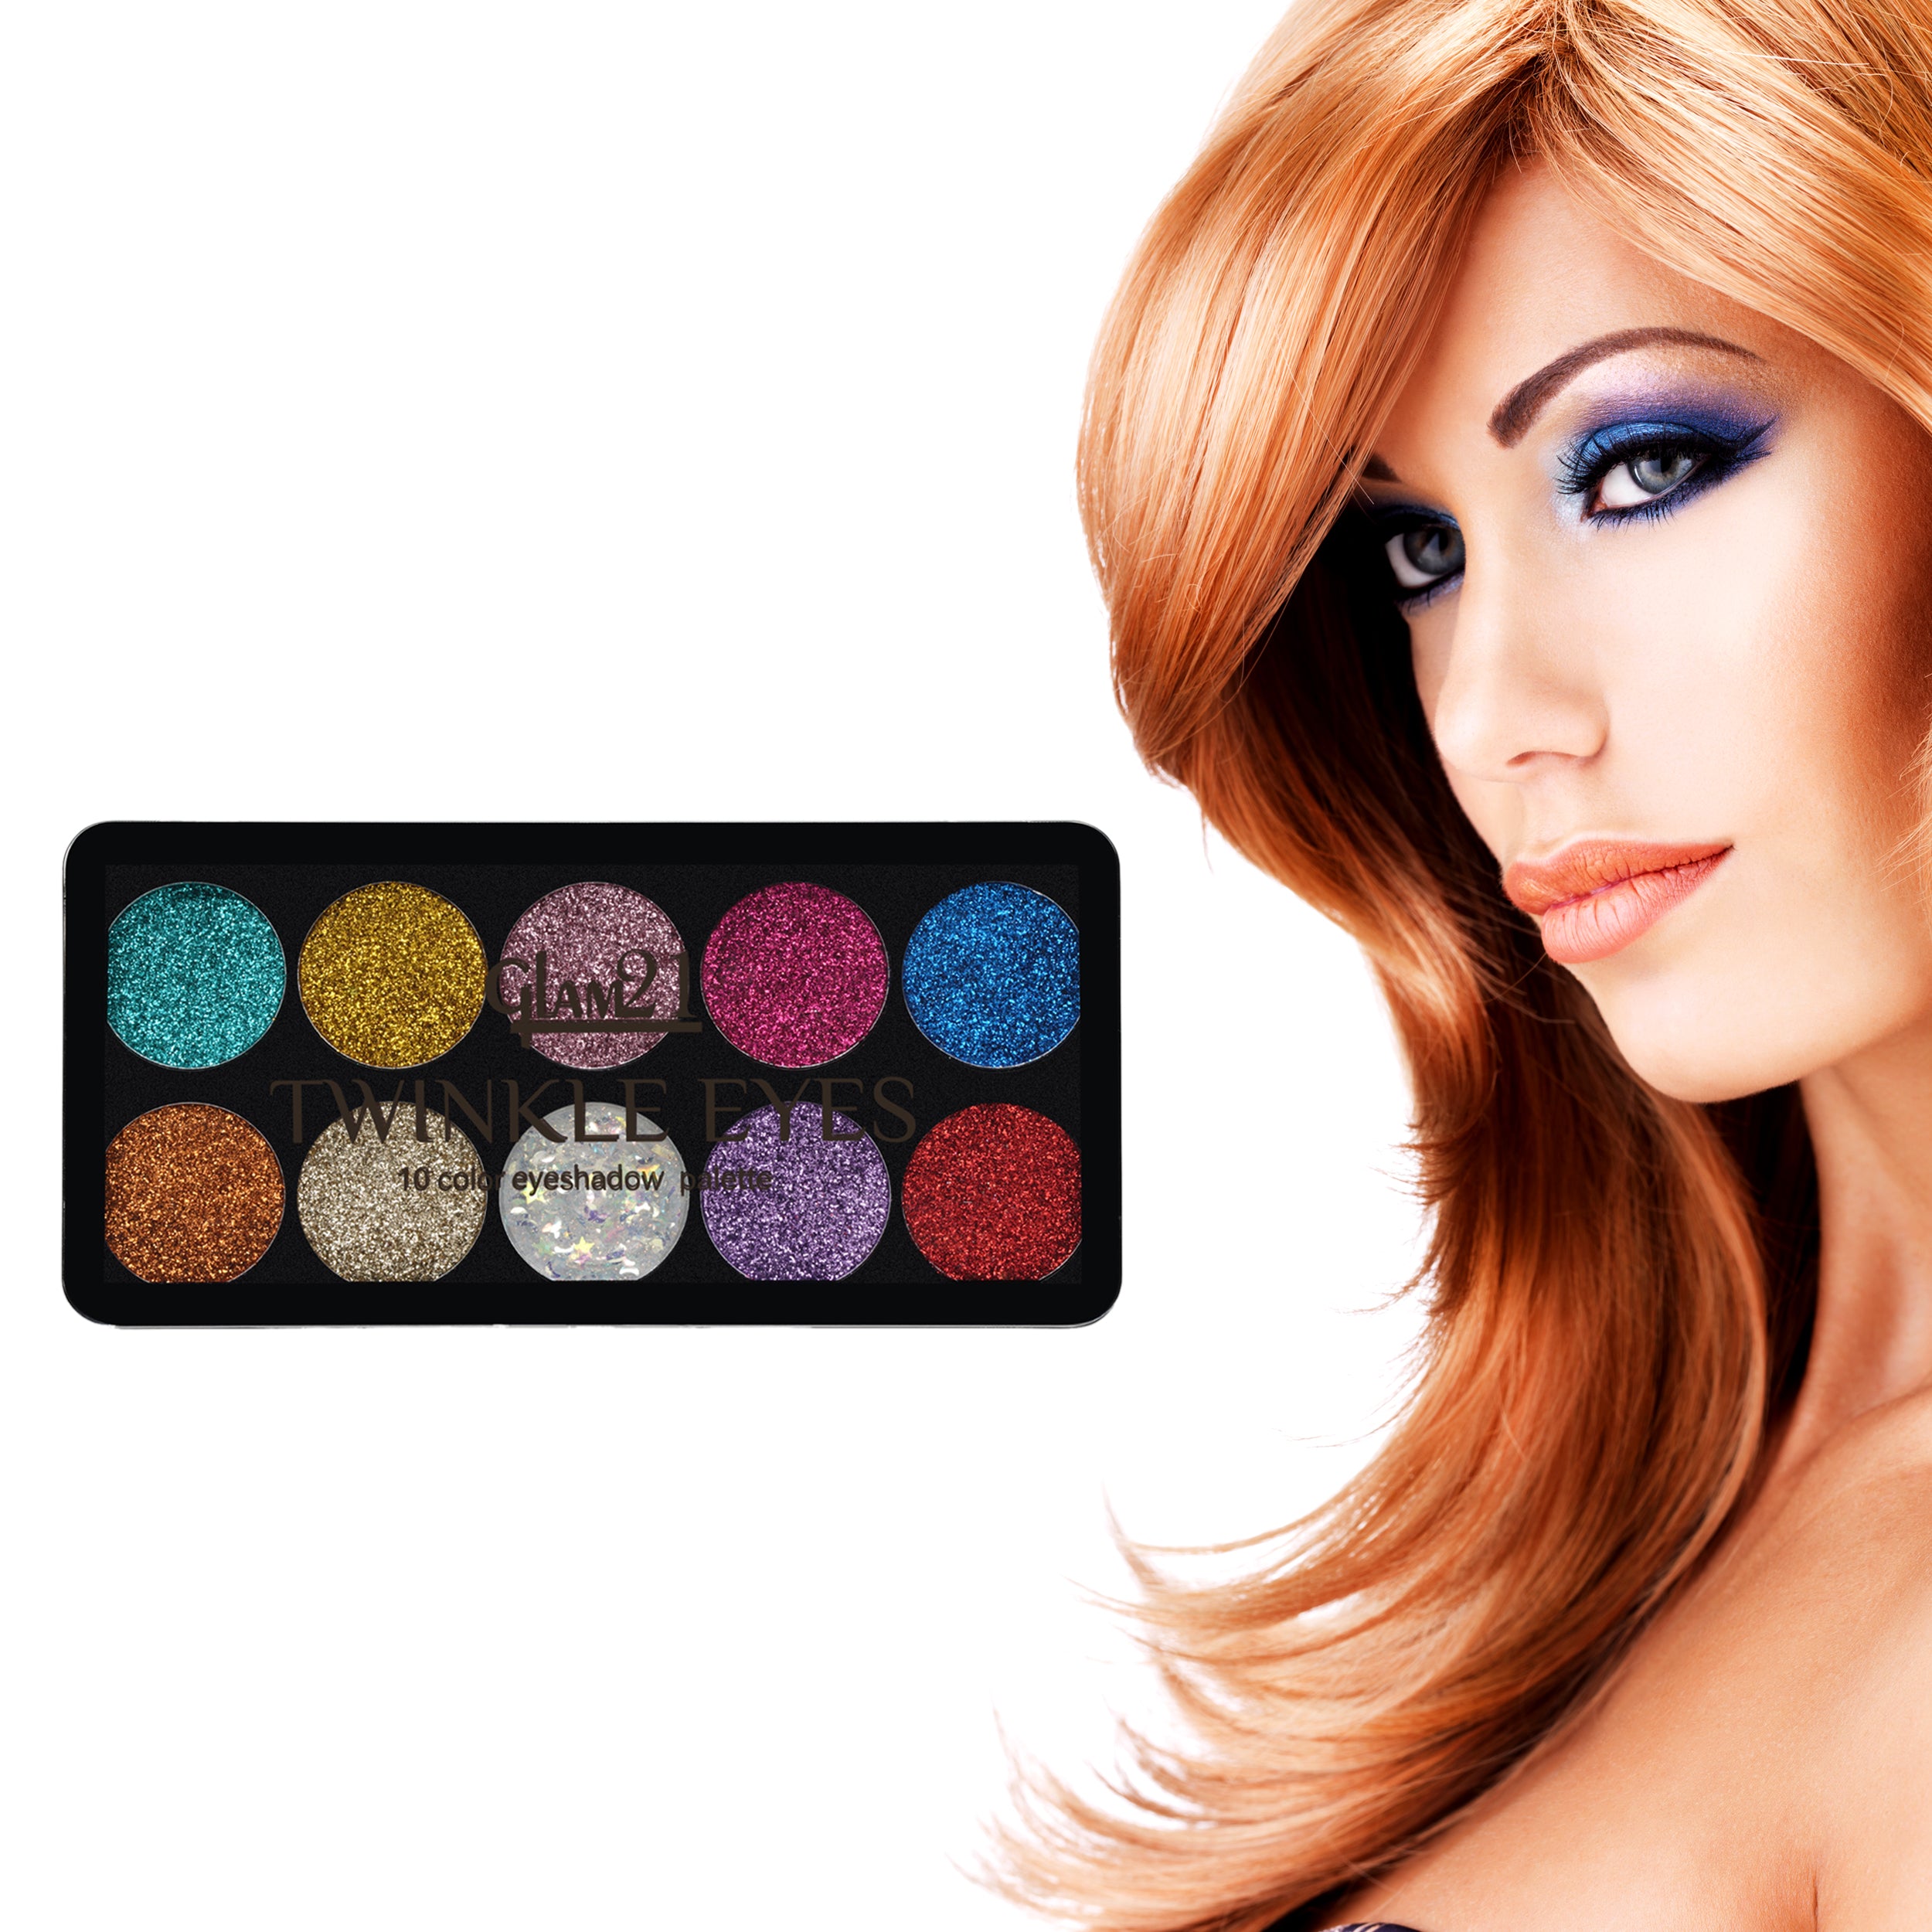 Glam21 Twinkle Eyes Glitter Palette|10 Cream Based Highly Pigmented Shades|Non Sticky Look -13gm-01-NA-13gm